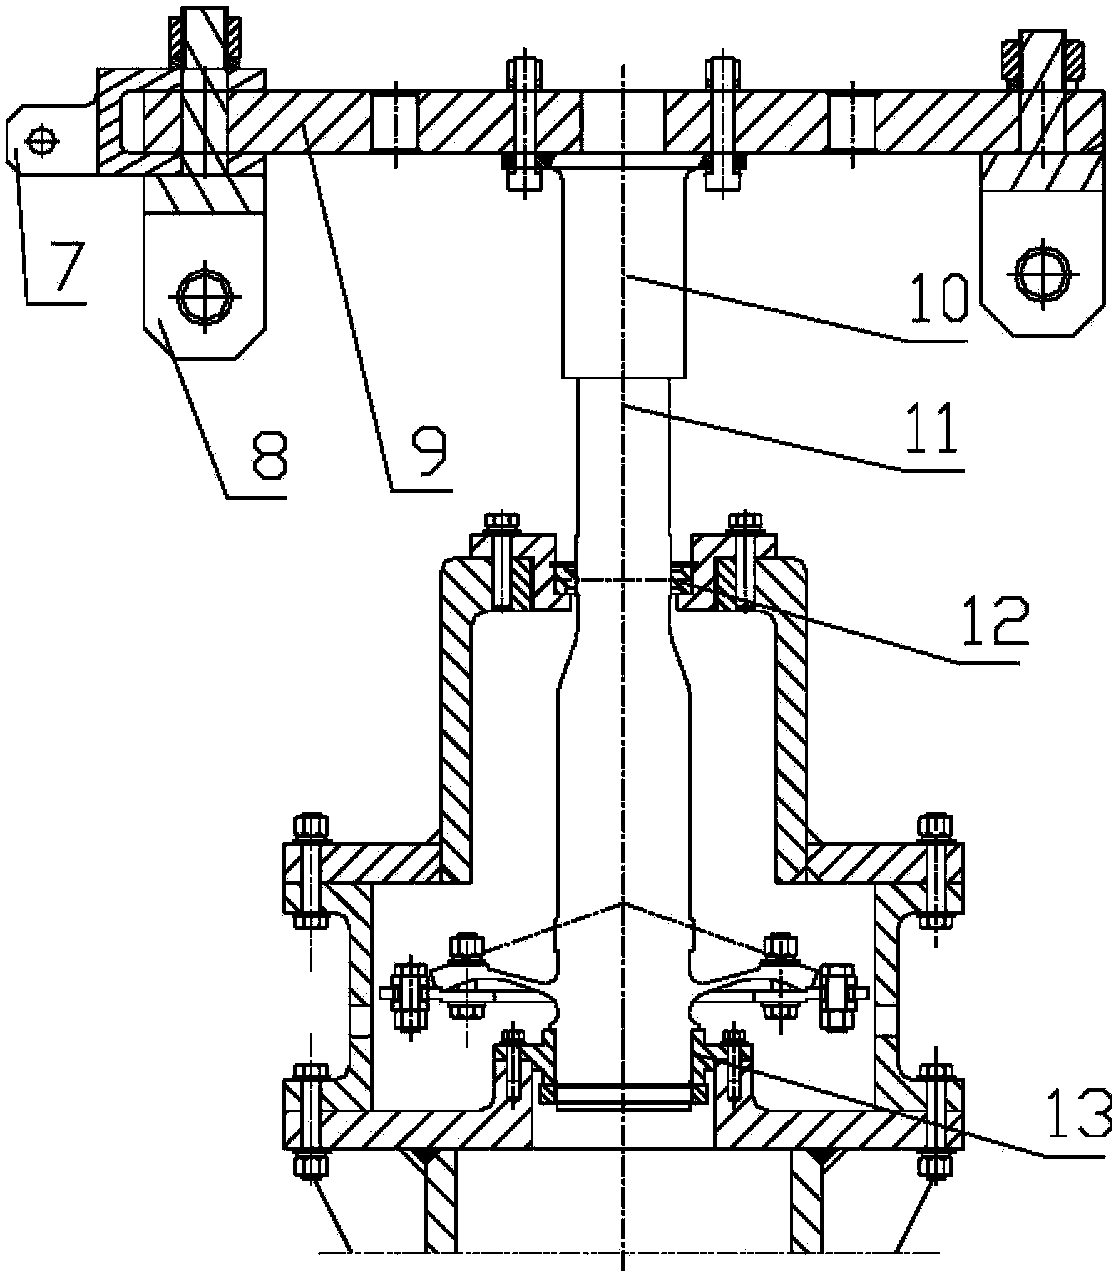 Rotation load applying device for tail rotor shaft fatigue test